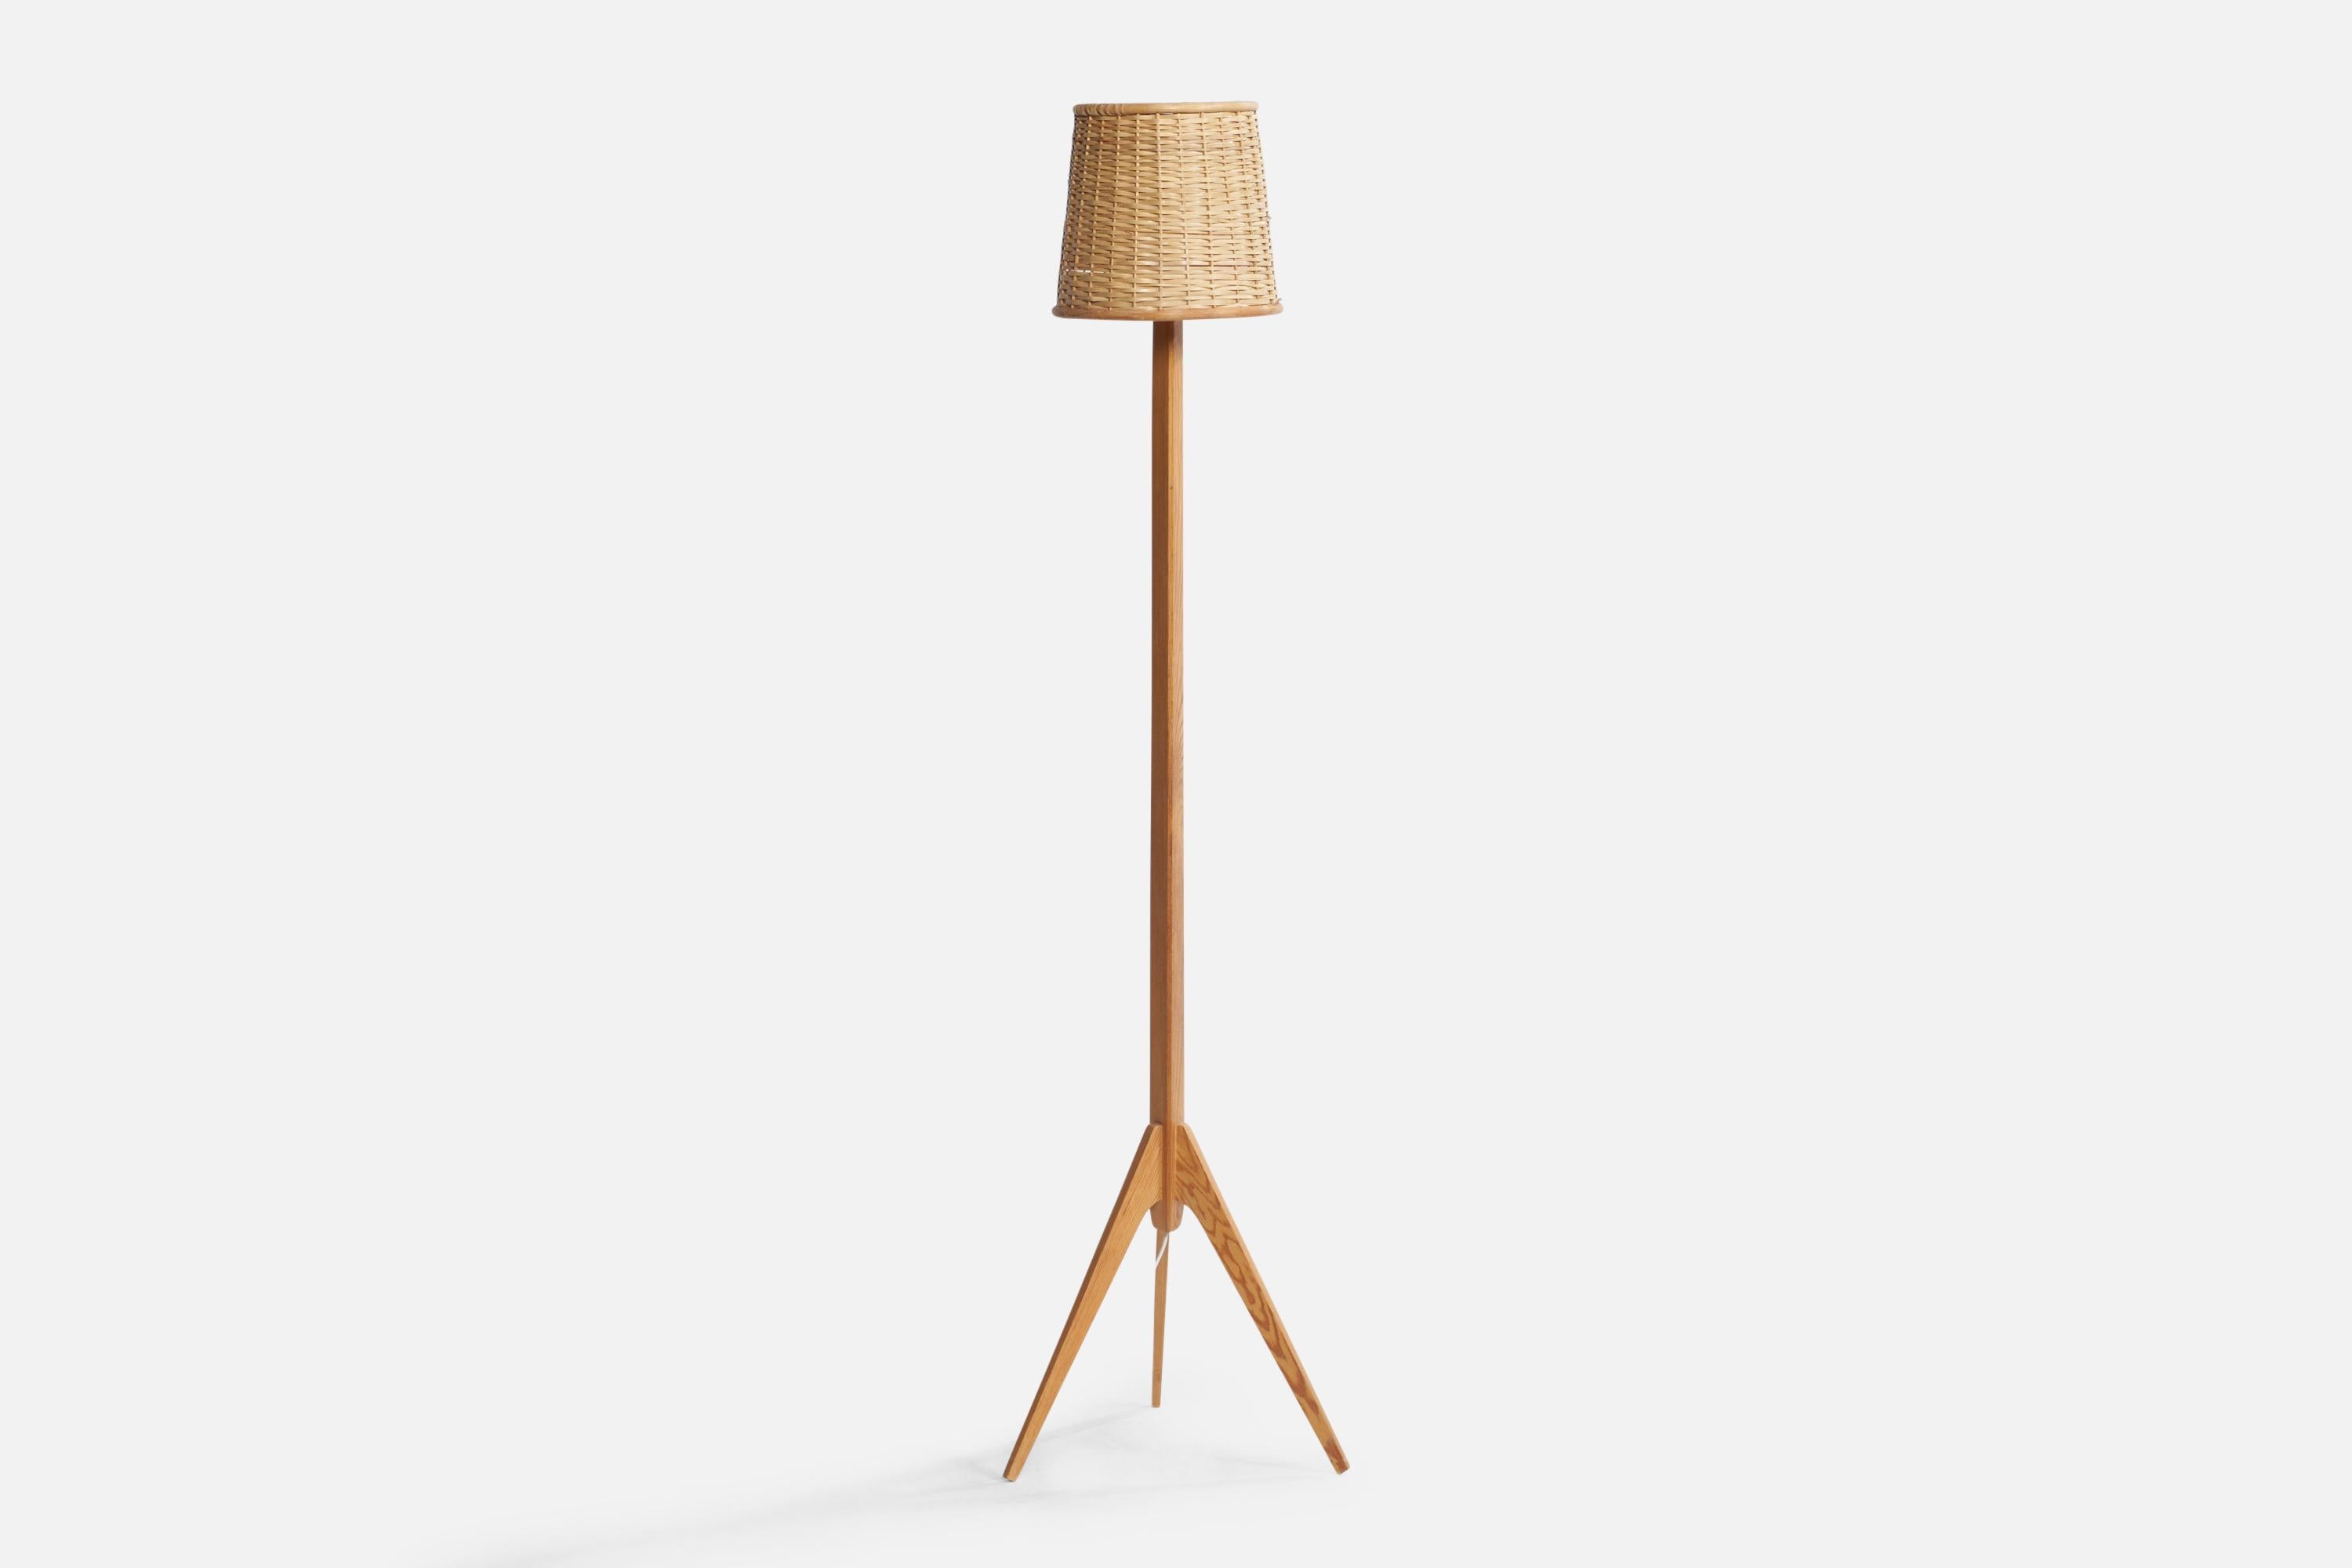 A pine, rattan and bamboo floor lamp designed and produced in Sweden, c. 1960s.

Overall Dimensions (inches): 59” H x 14.75” W x 14.75” D. Stated dimensions include shade.
Bulb Specifications: E-26 Bulb
Number of Sockets: 1
All lighting will be